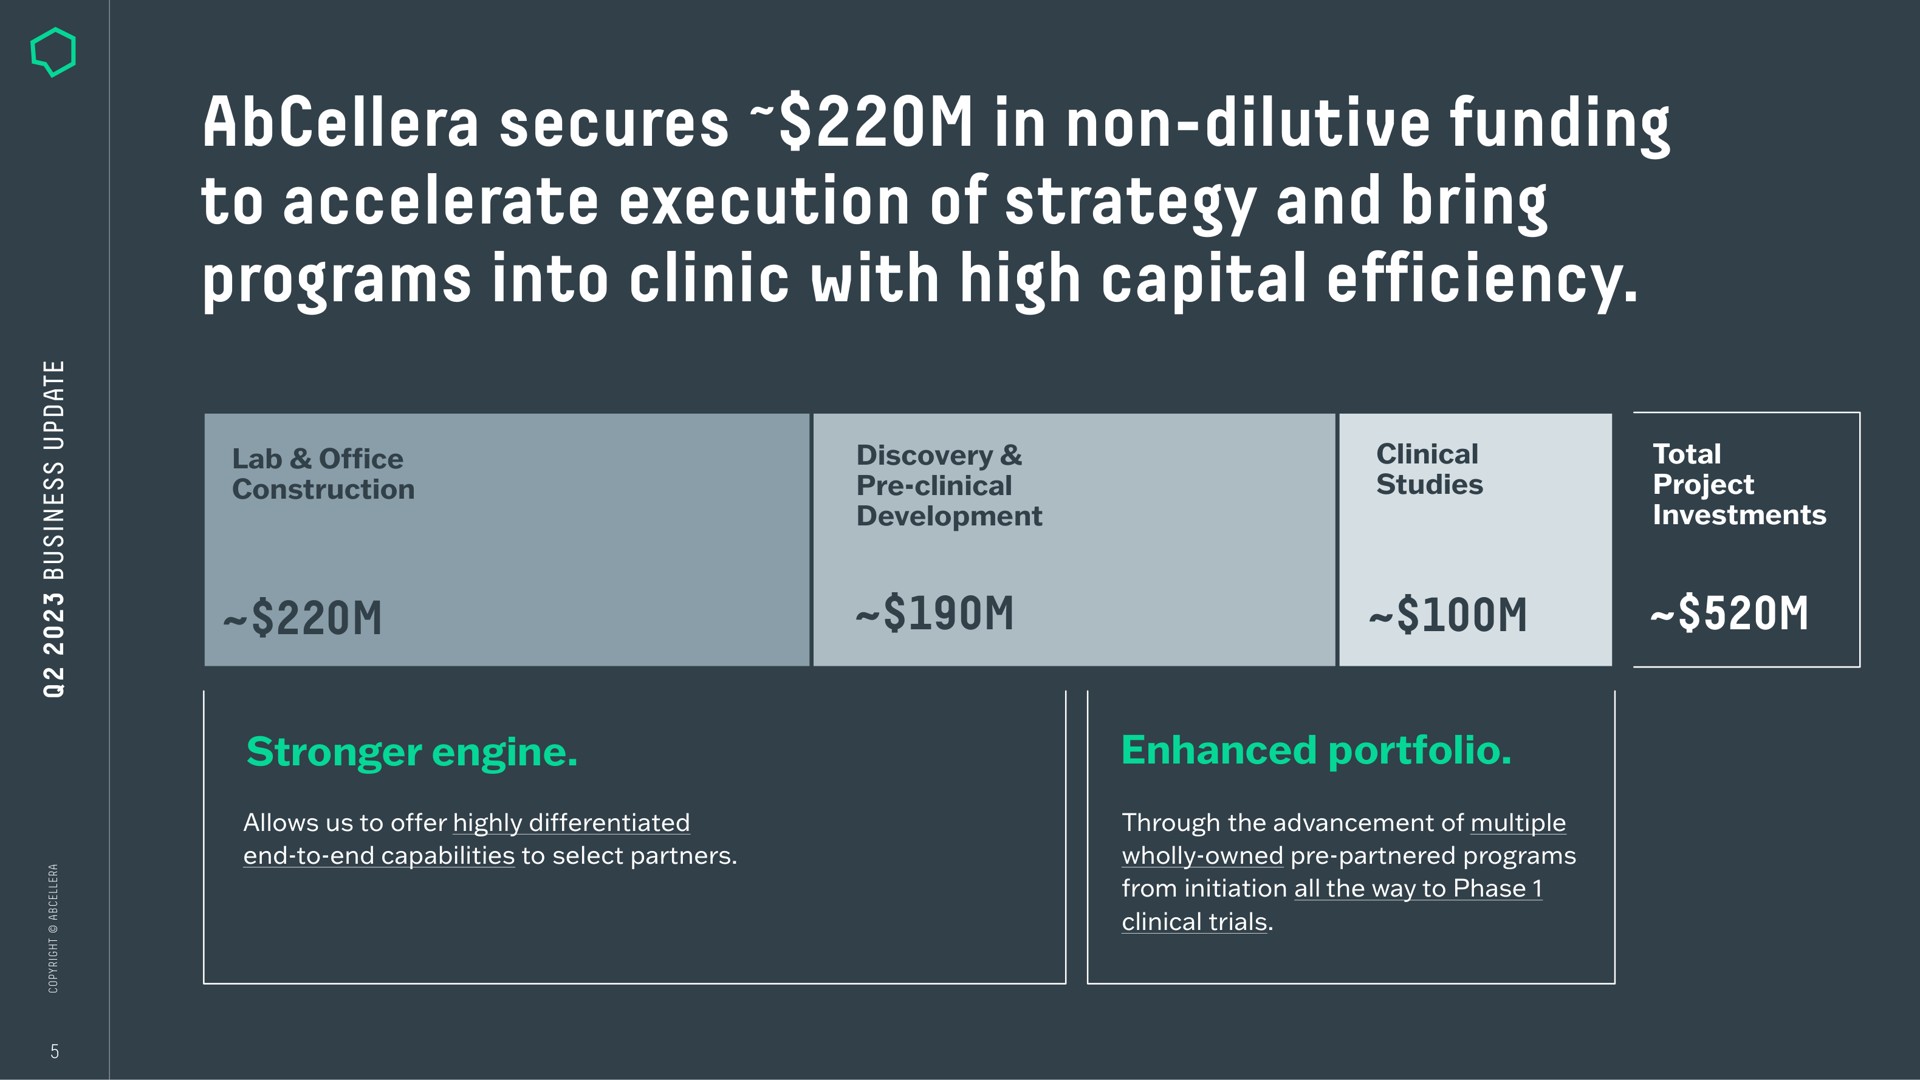 secures in non dilutive funding to accelerate execution of strategy and bring programs into clinic with high capital efficiency me cate lak | AbCellera